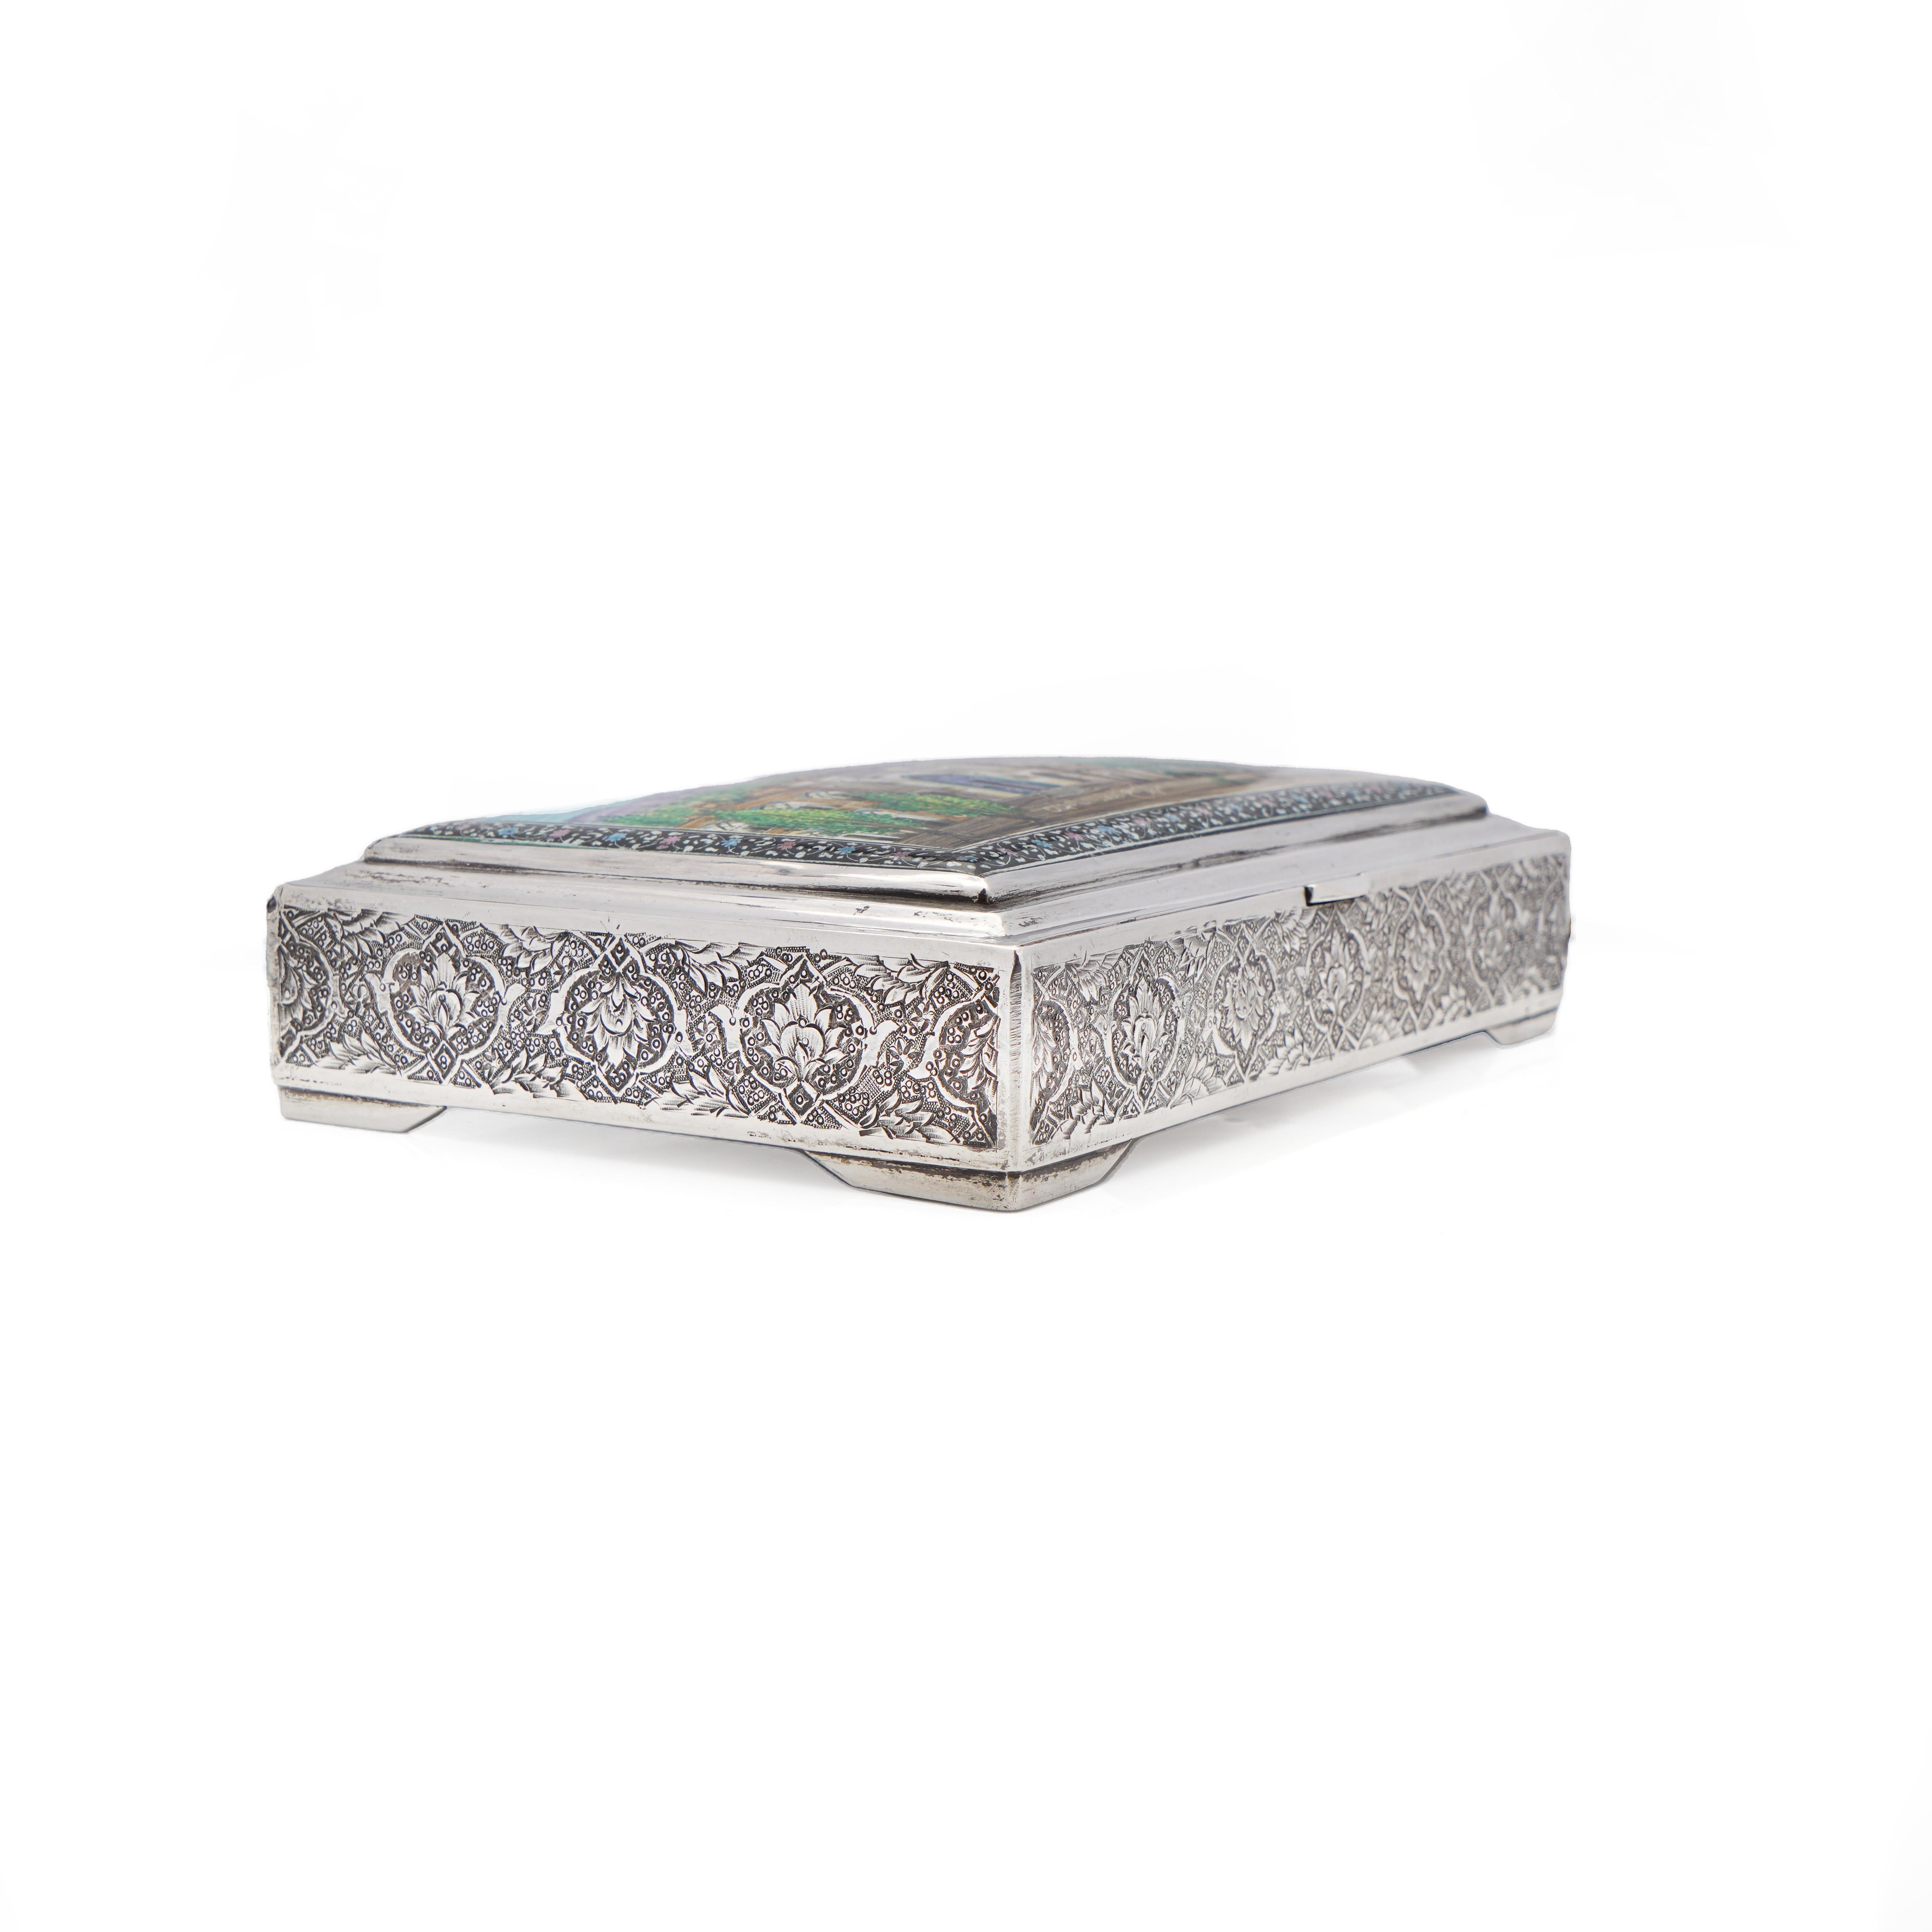 Silver An exquisite vintage Persian/Iranian 84 silver and enamel box adorned with a cap For Sale